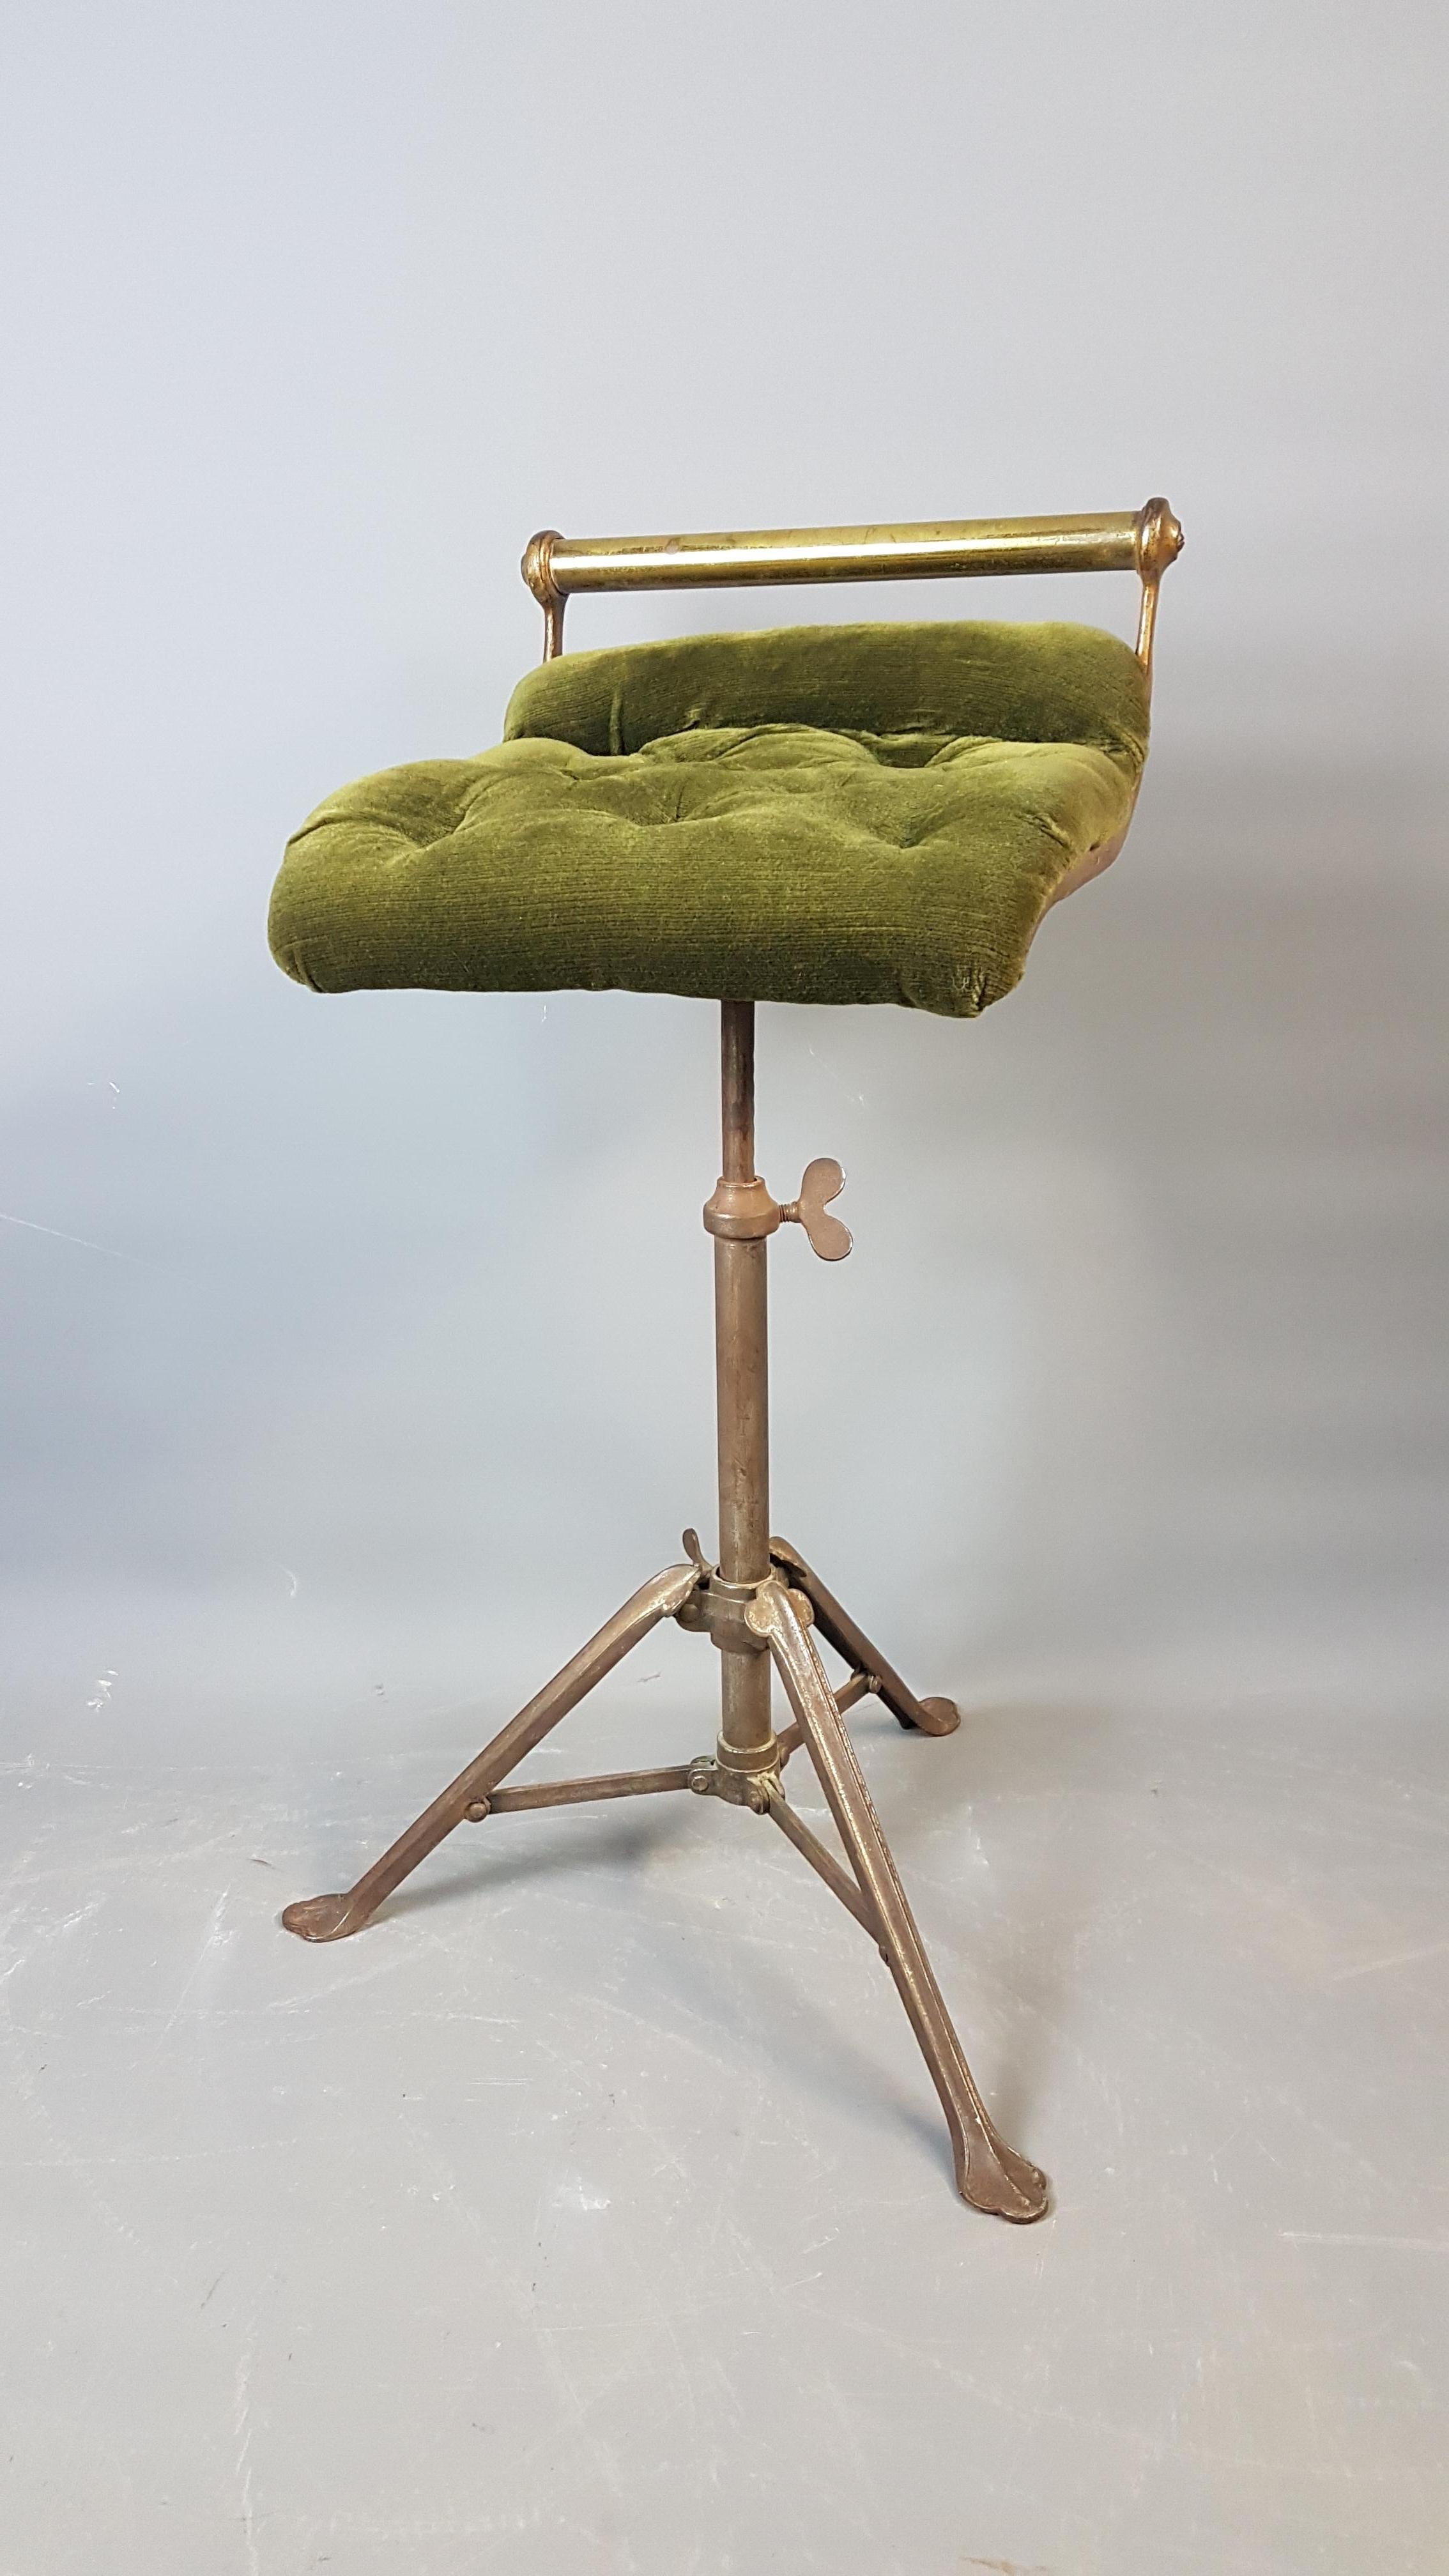 A beautiful original Cello stool by C.H.Hare that dismantles for storage or ease of transport. The seat pad is the original green velvet with buttoning (one button missing).The legs unfold and bolt in place with the nut and the seat rises through